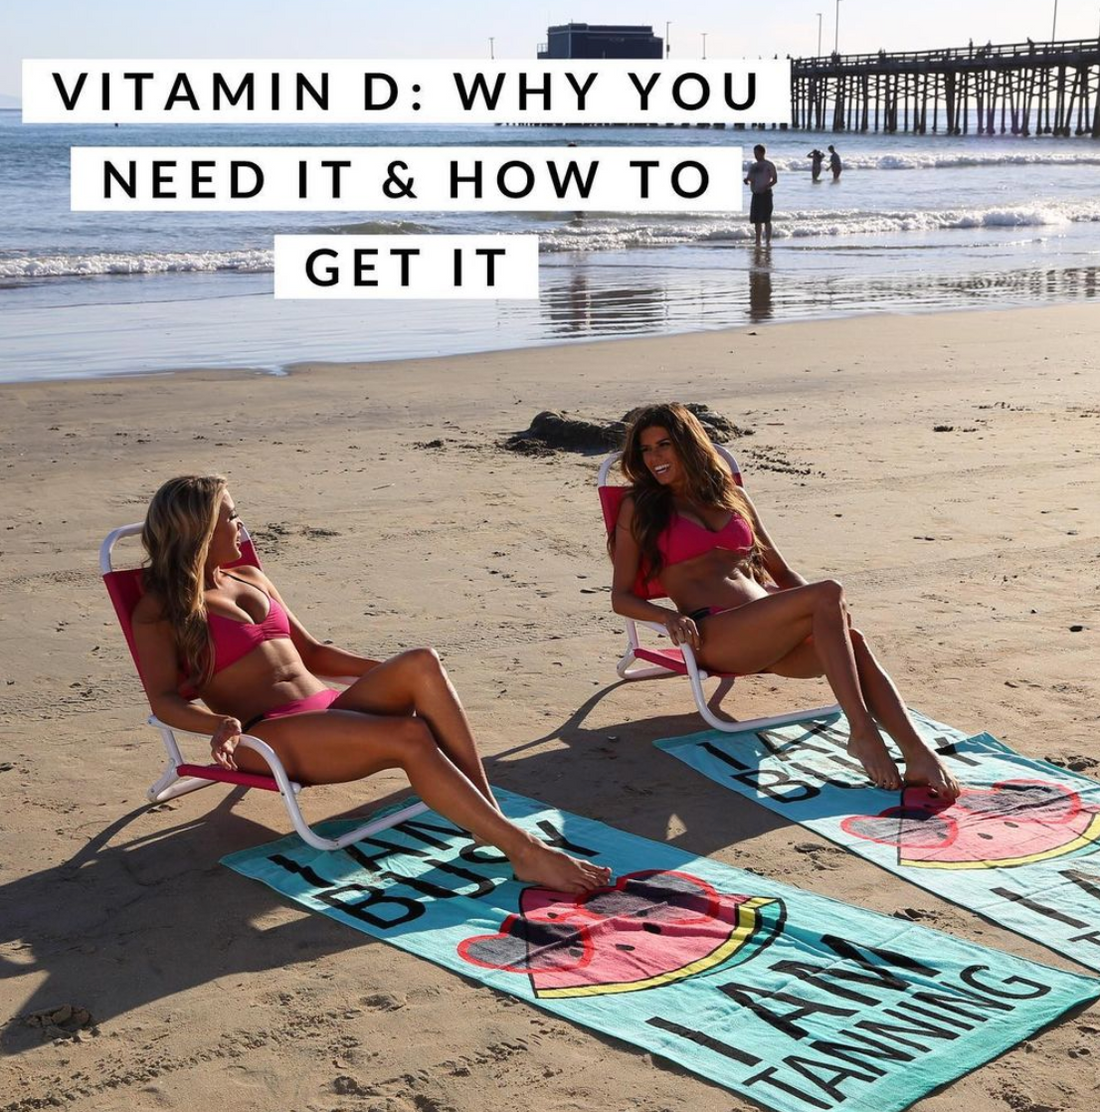 Episode 19: Vitamin D: Why you need it & how to get it!